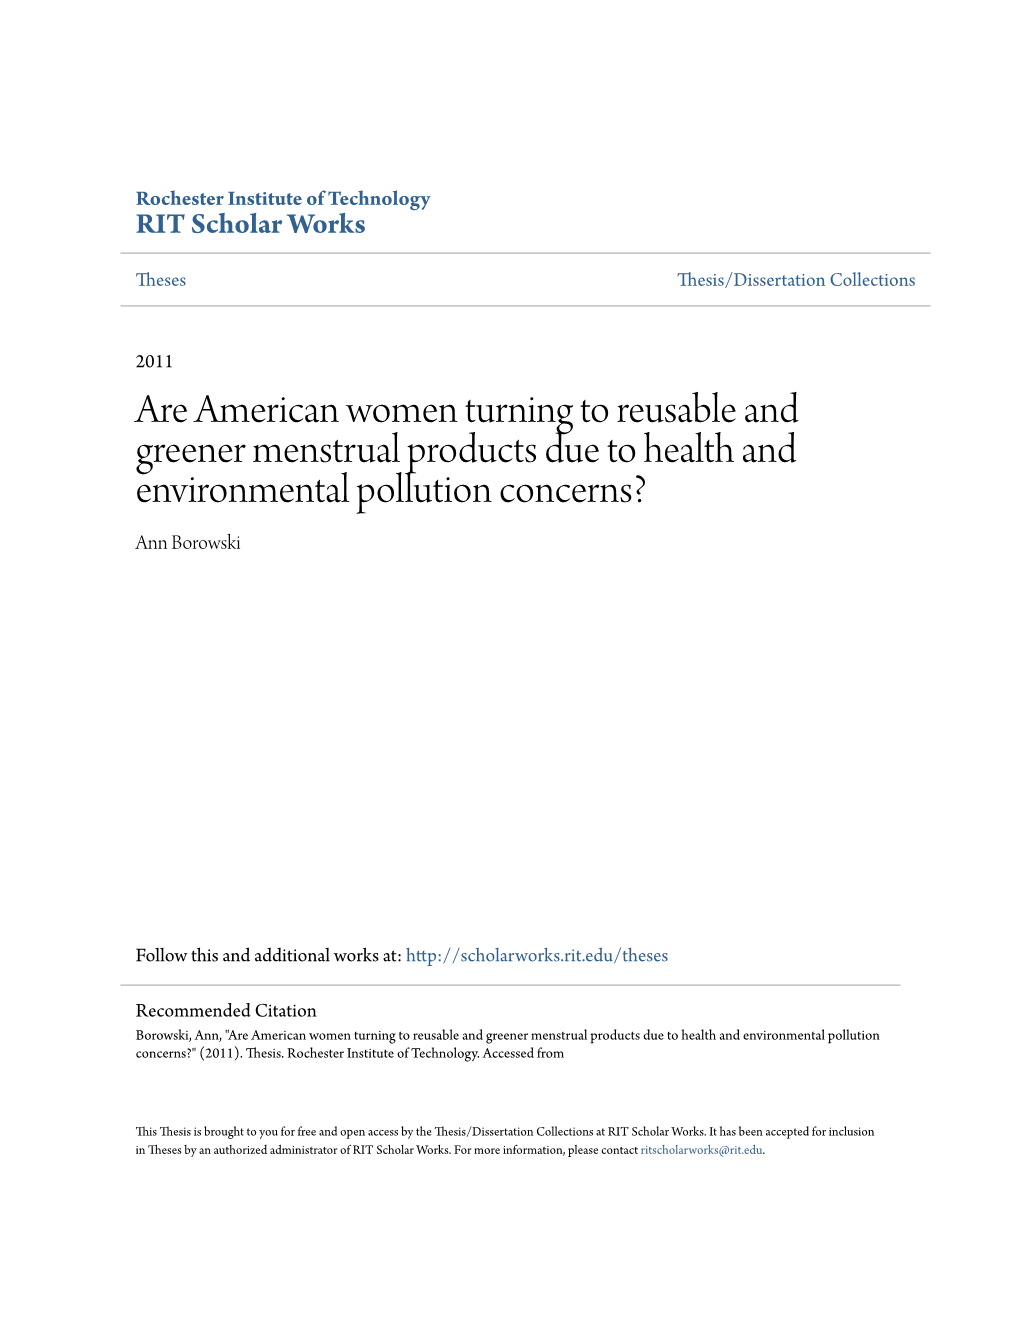 Are American Women Turning to Reusable and Greener Menstrual Products Due to Health and Environmental Pollution Concerns? Ann Borowski